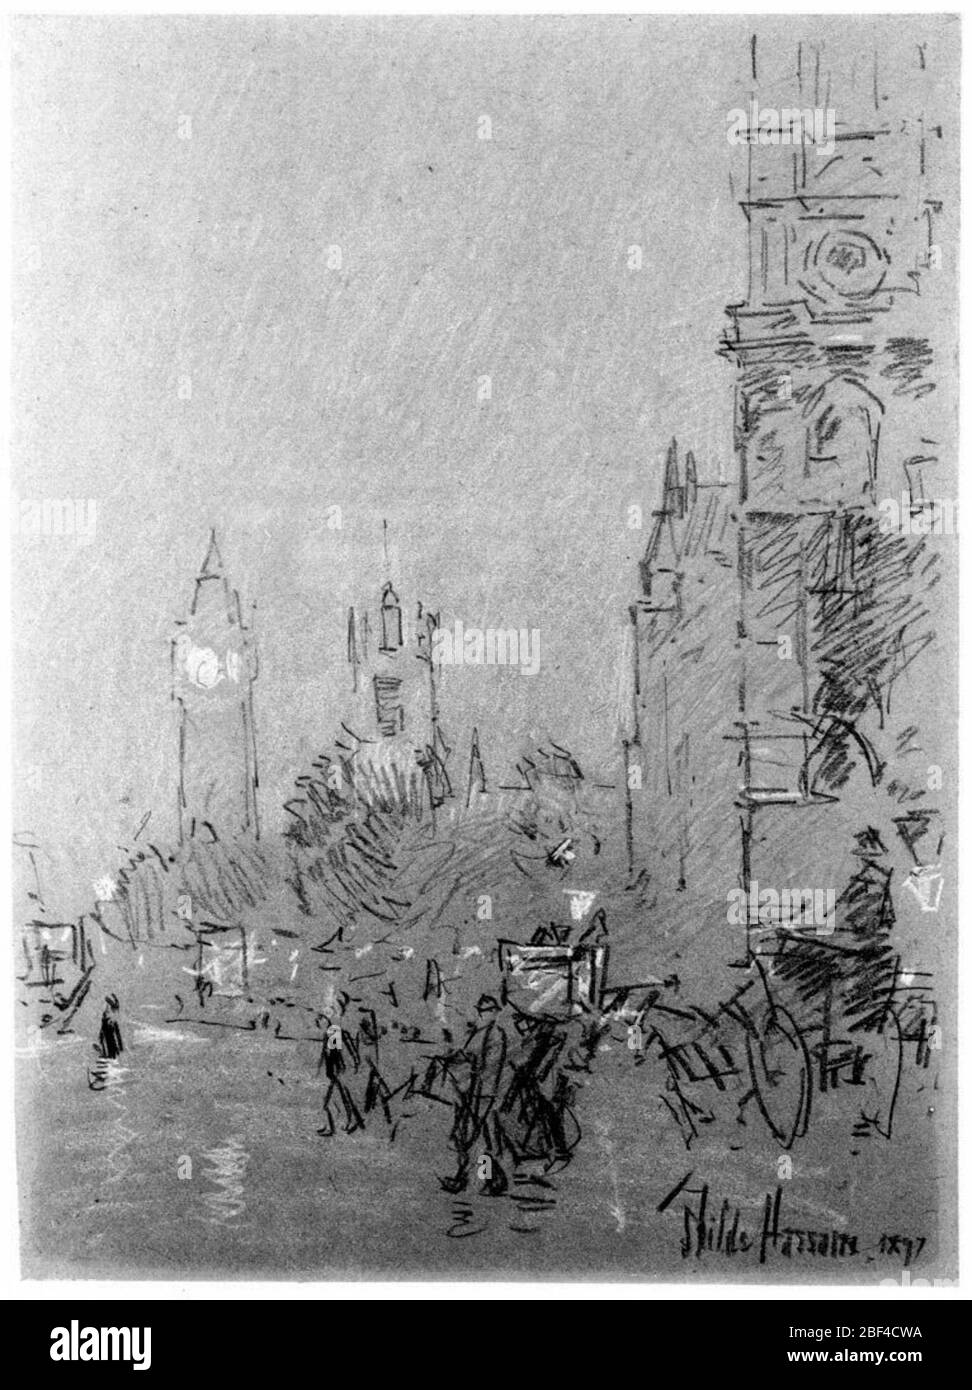 London Evening. Jh Purchased From Parke-bernet Galleries Nov 13, 1957 Stock Photo